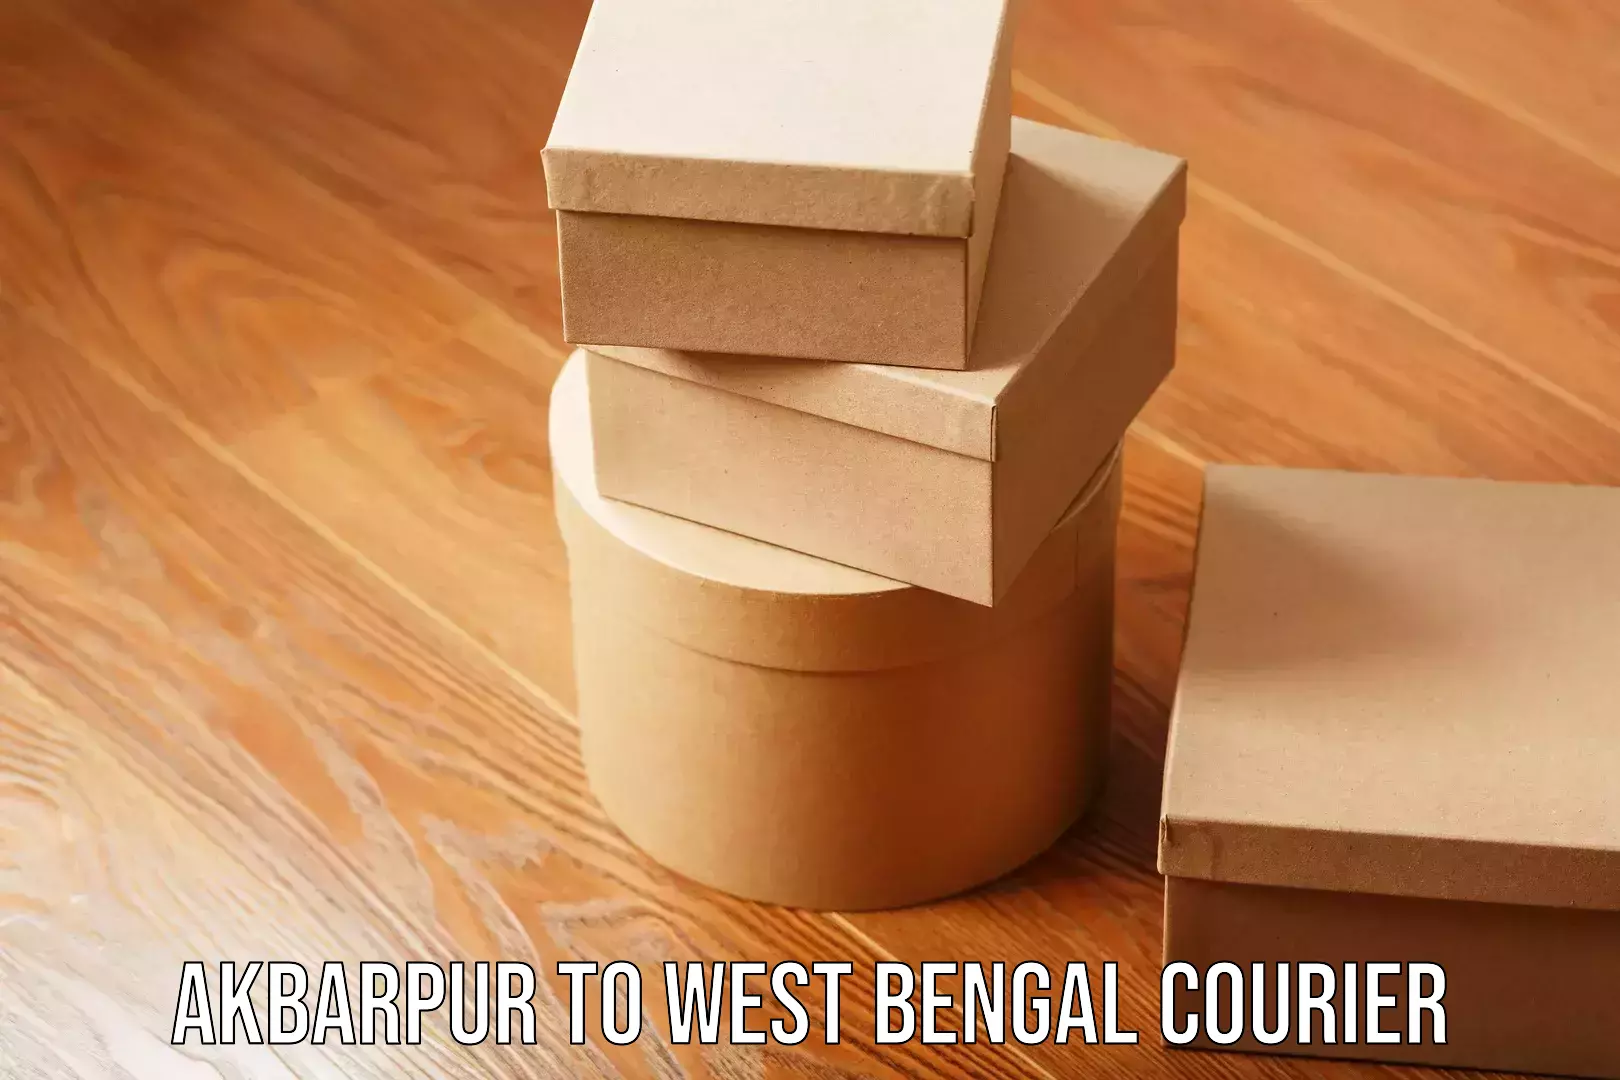 Advanced shipping network Akbarpur to West Bengal